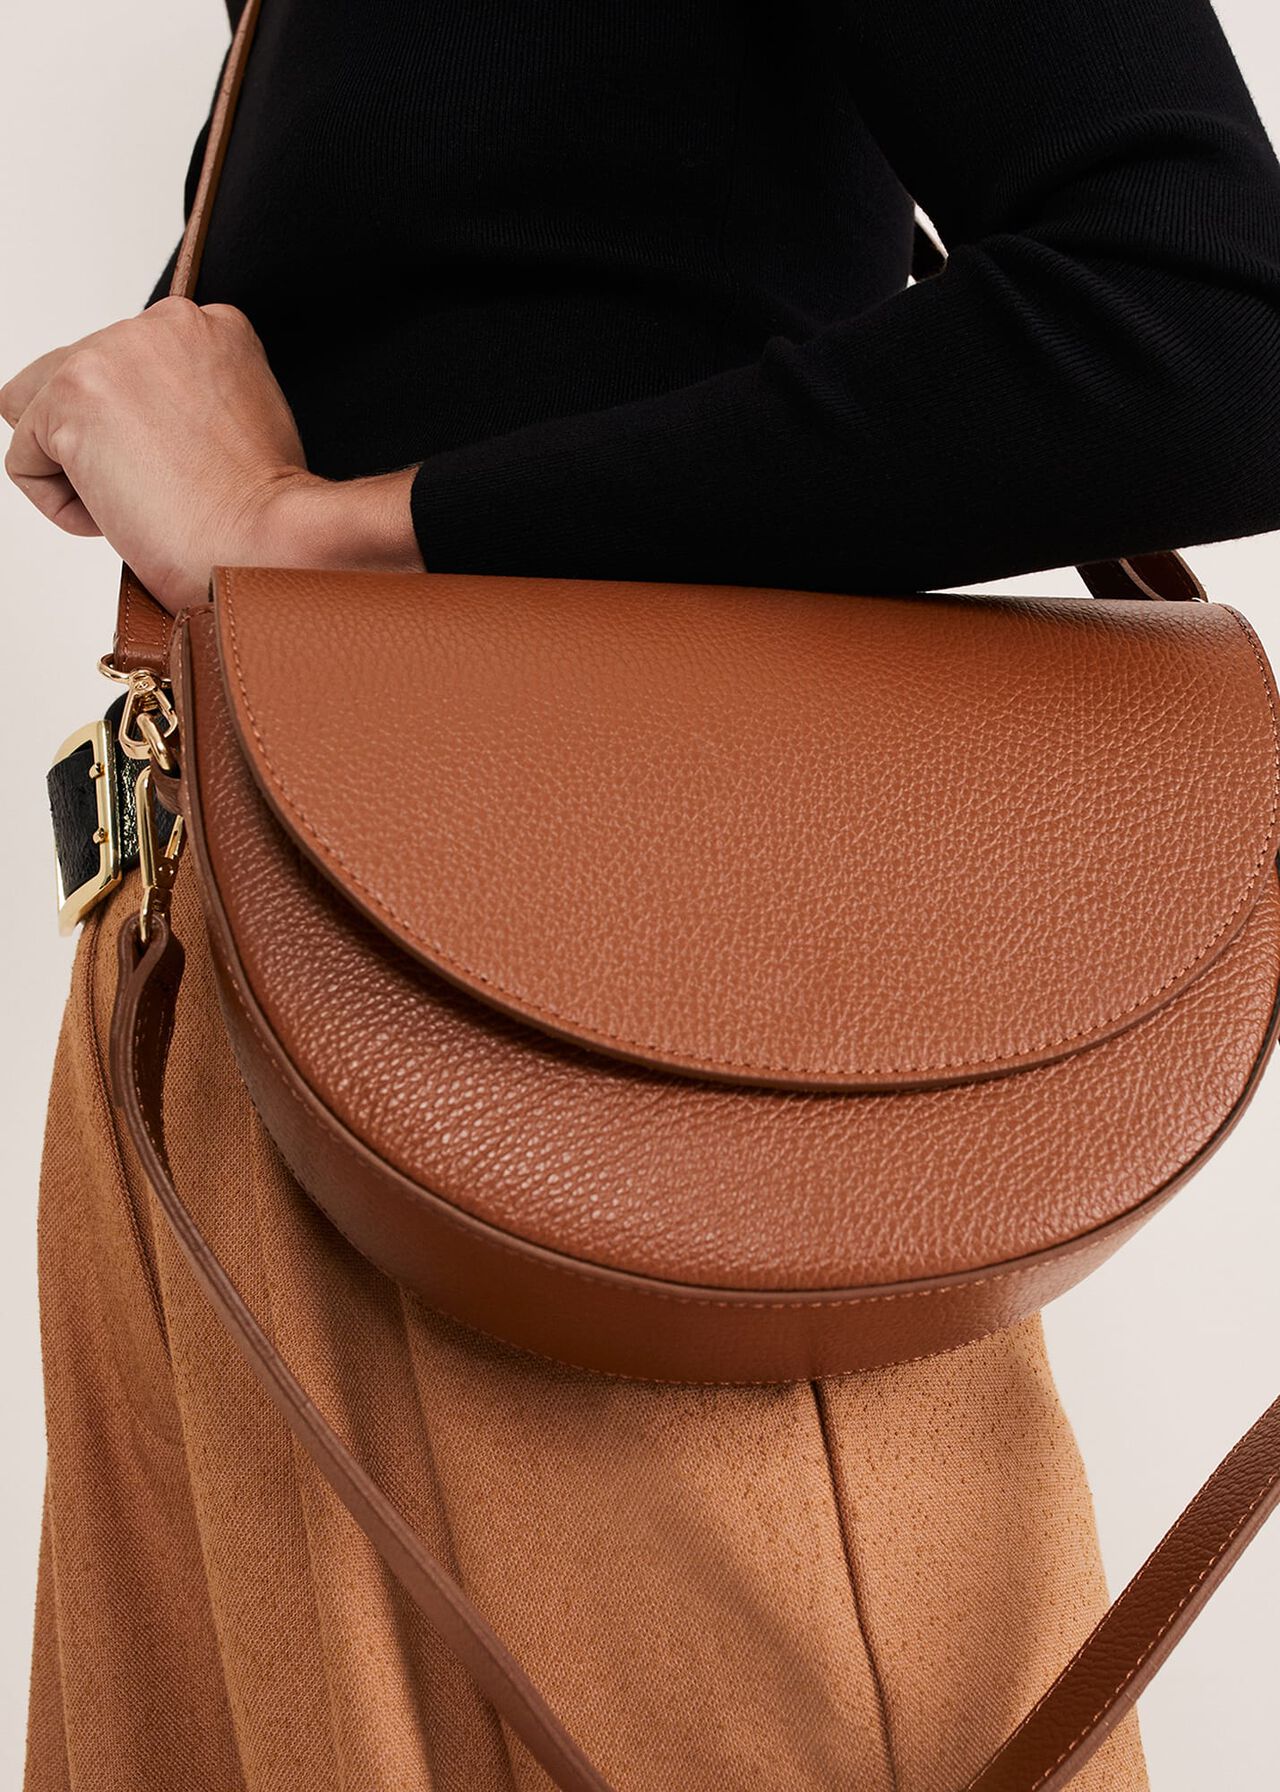 Textured Leather Cross Body Bag